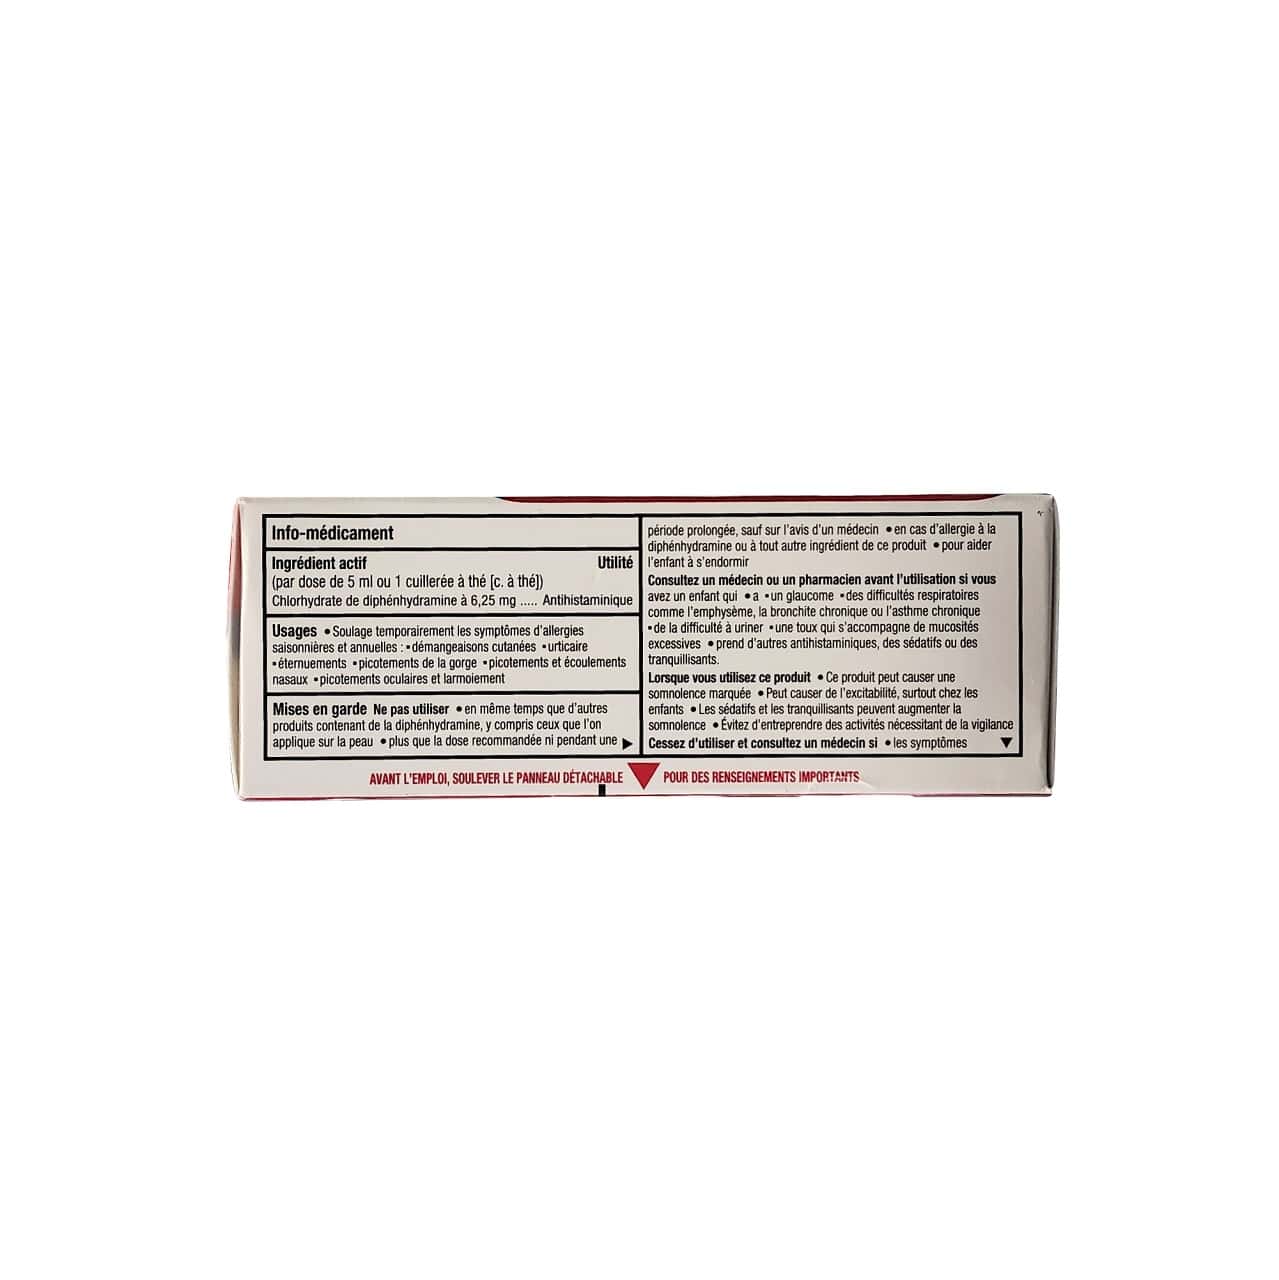 Ingredients, uses, warnings for Benadryl Allergy Liquid for Children Diphenhydramine Hydrochloride Bubble Gum Flavour (100 mL) in French